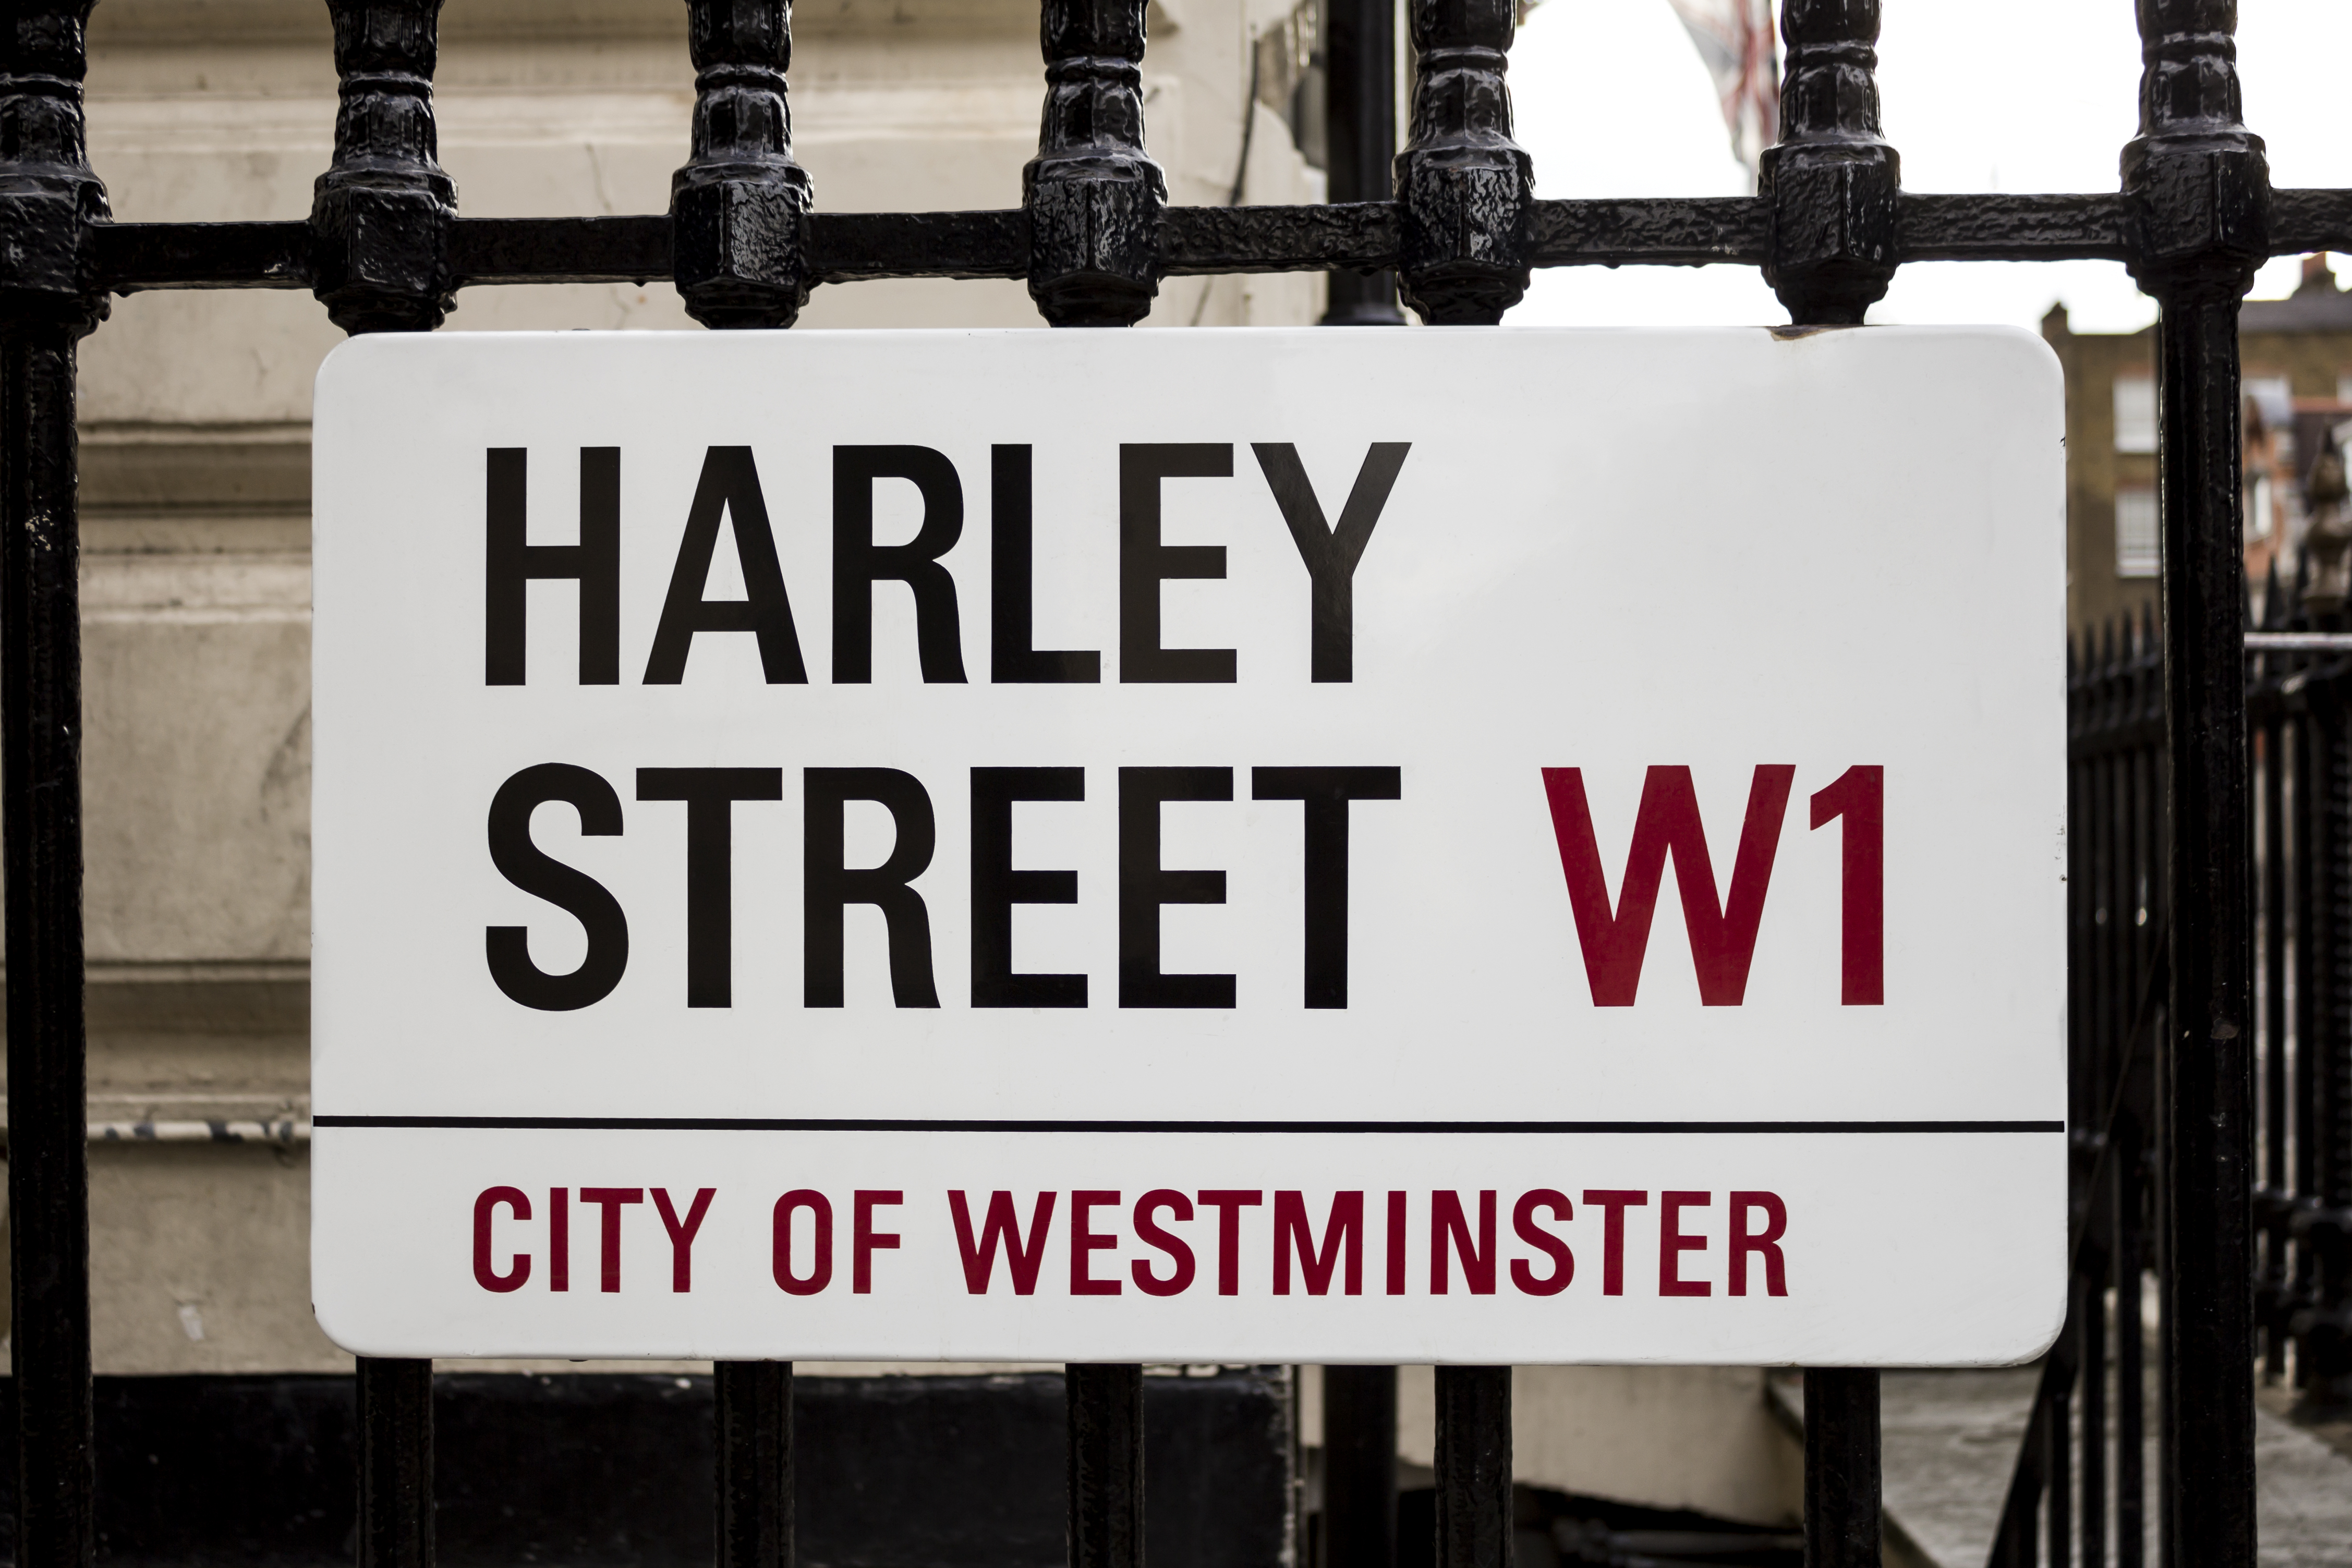 A Street sign of Harley Street, W1, City of Westminster